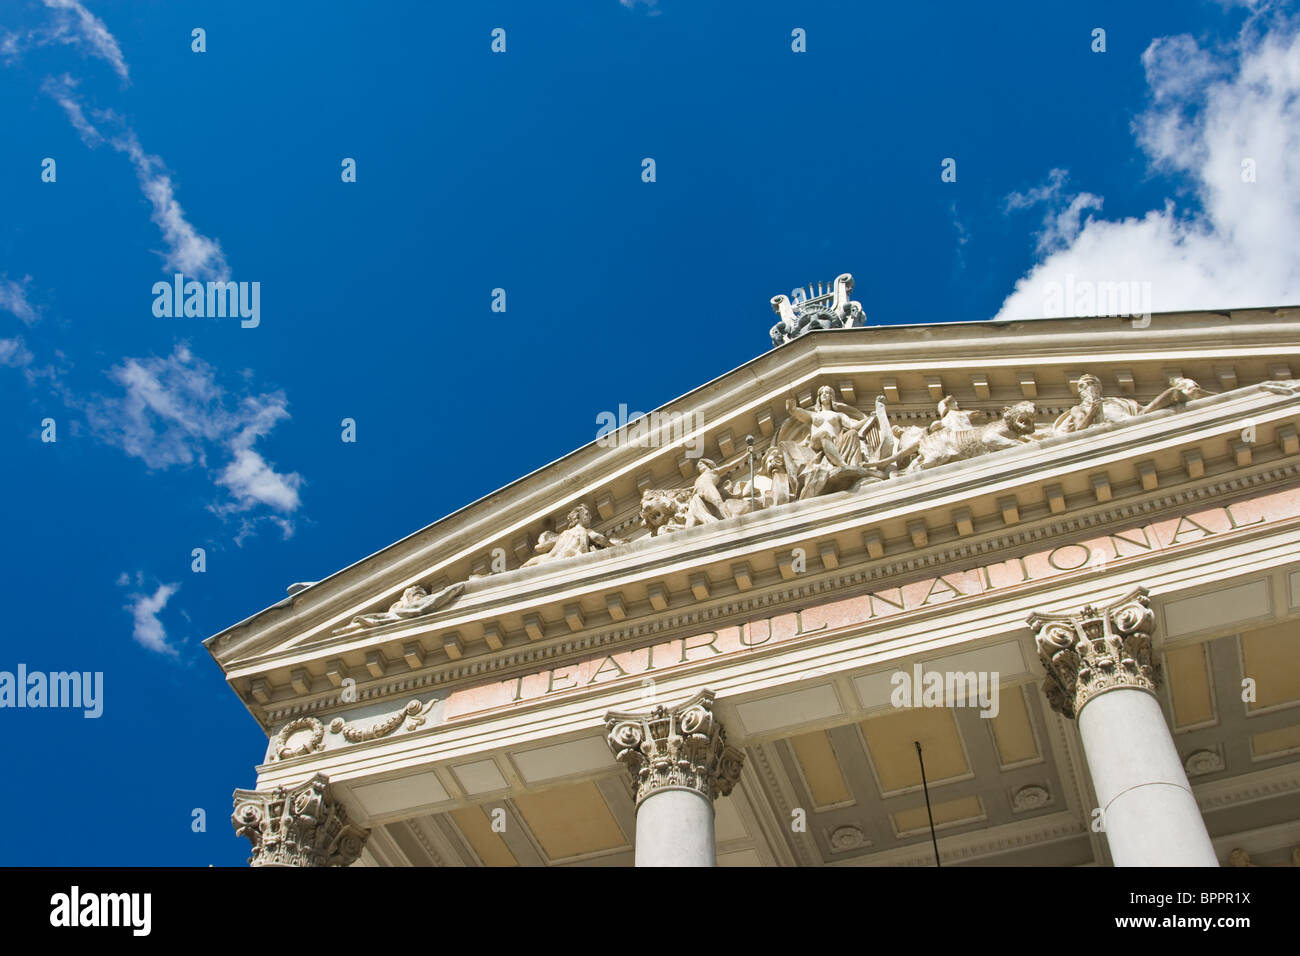 National Theater in Iasi city before restoration, Romania. Stock Photo